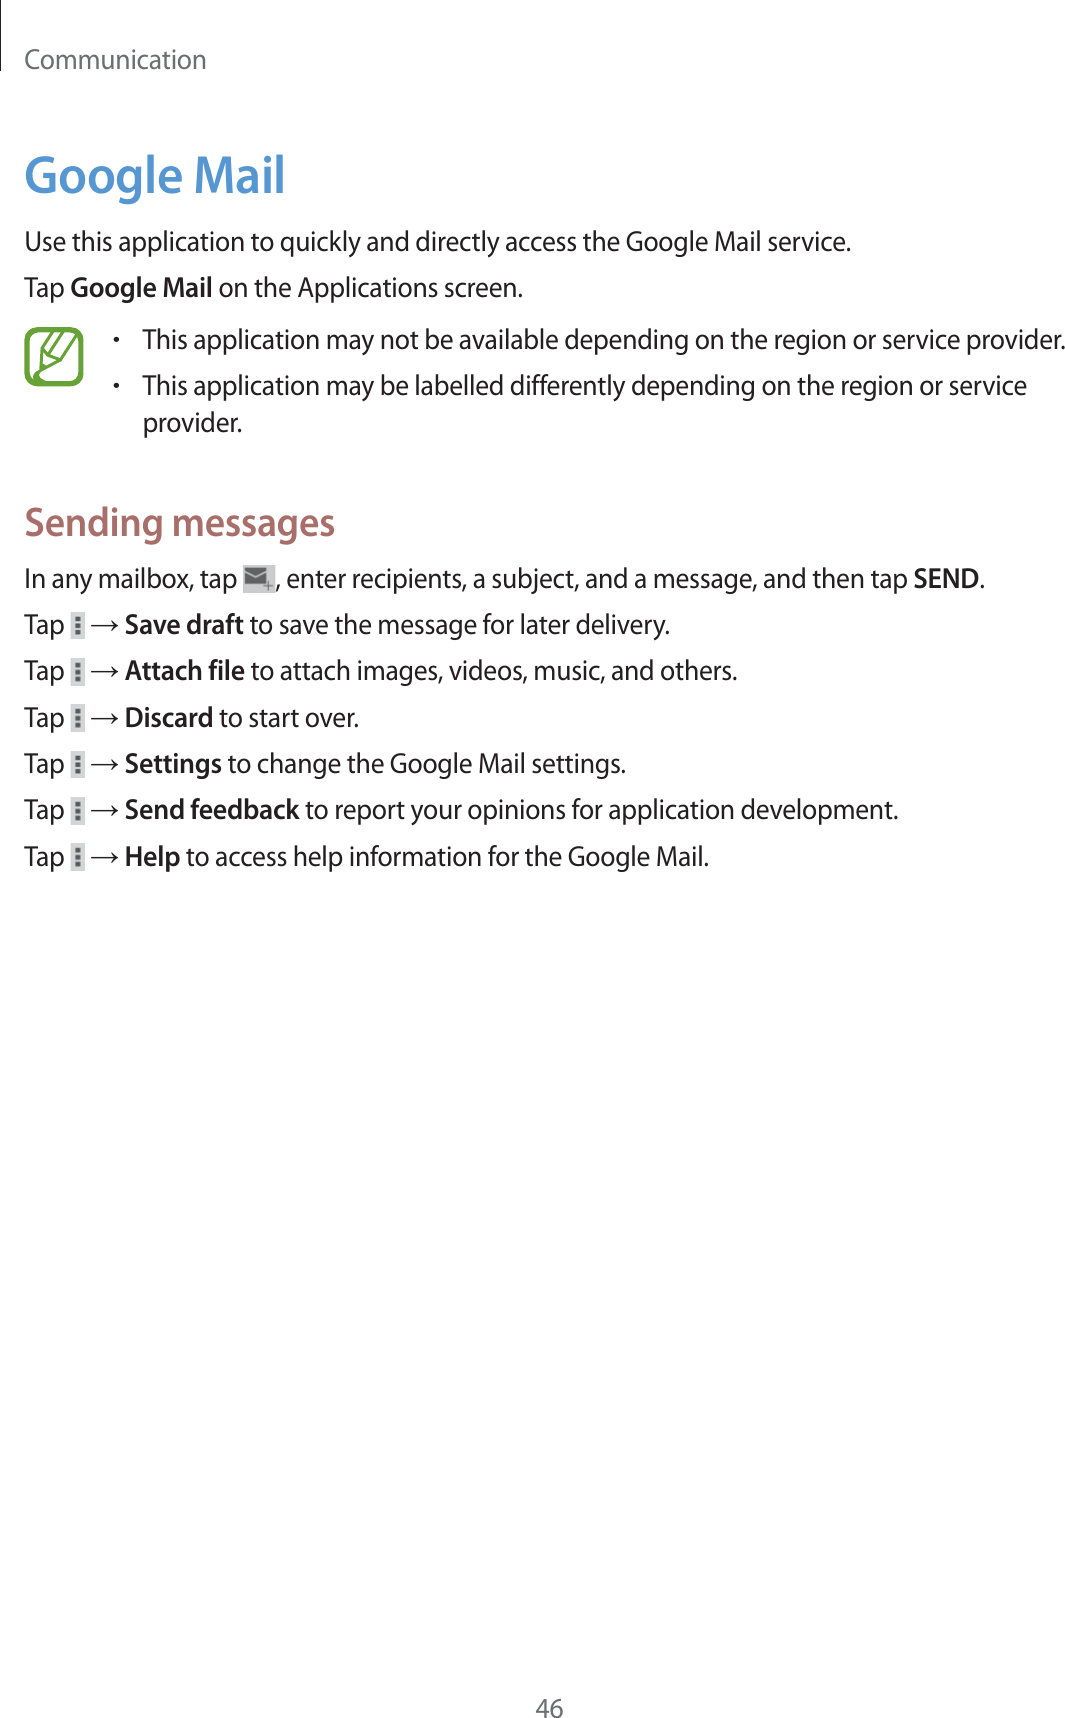 Communication46Google MailUse this application to quickly and directly access the Google Mail service.Tap Google Mail on the Applications screen.rThis application may not be available depending on the region or service provider.rThis application may be labelled differently depending on the region or service provider.Sending messagesIn any mailbox, tap  , enter recipients, a subject, and a message, and then tap SEND.Tap   ĺ Save draft to save the message for later delivery.Tap   ĺ Attach file to attach images, videos, music, and others.Tap   ĺ Discard to start over.Tap   ĺ Settings to change the Google Mail settings.Tap   ĺ Send feedback to report your opinions for application development.Tap   ĺ Help to access help information for the Google Mail.